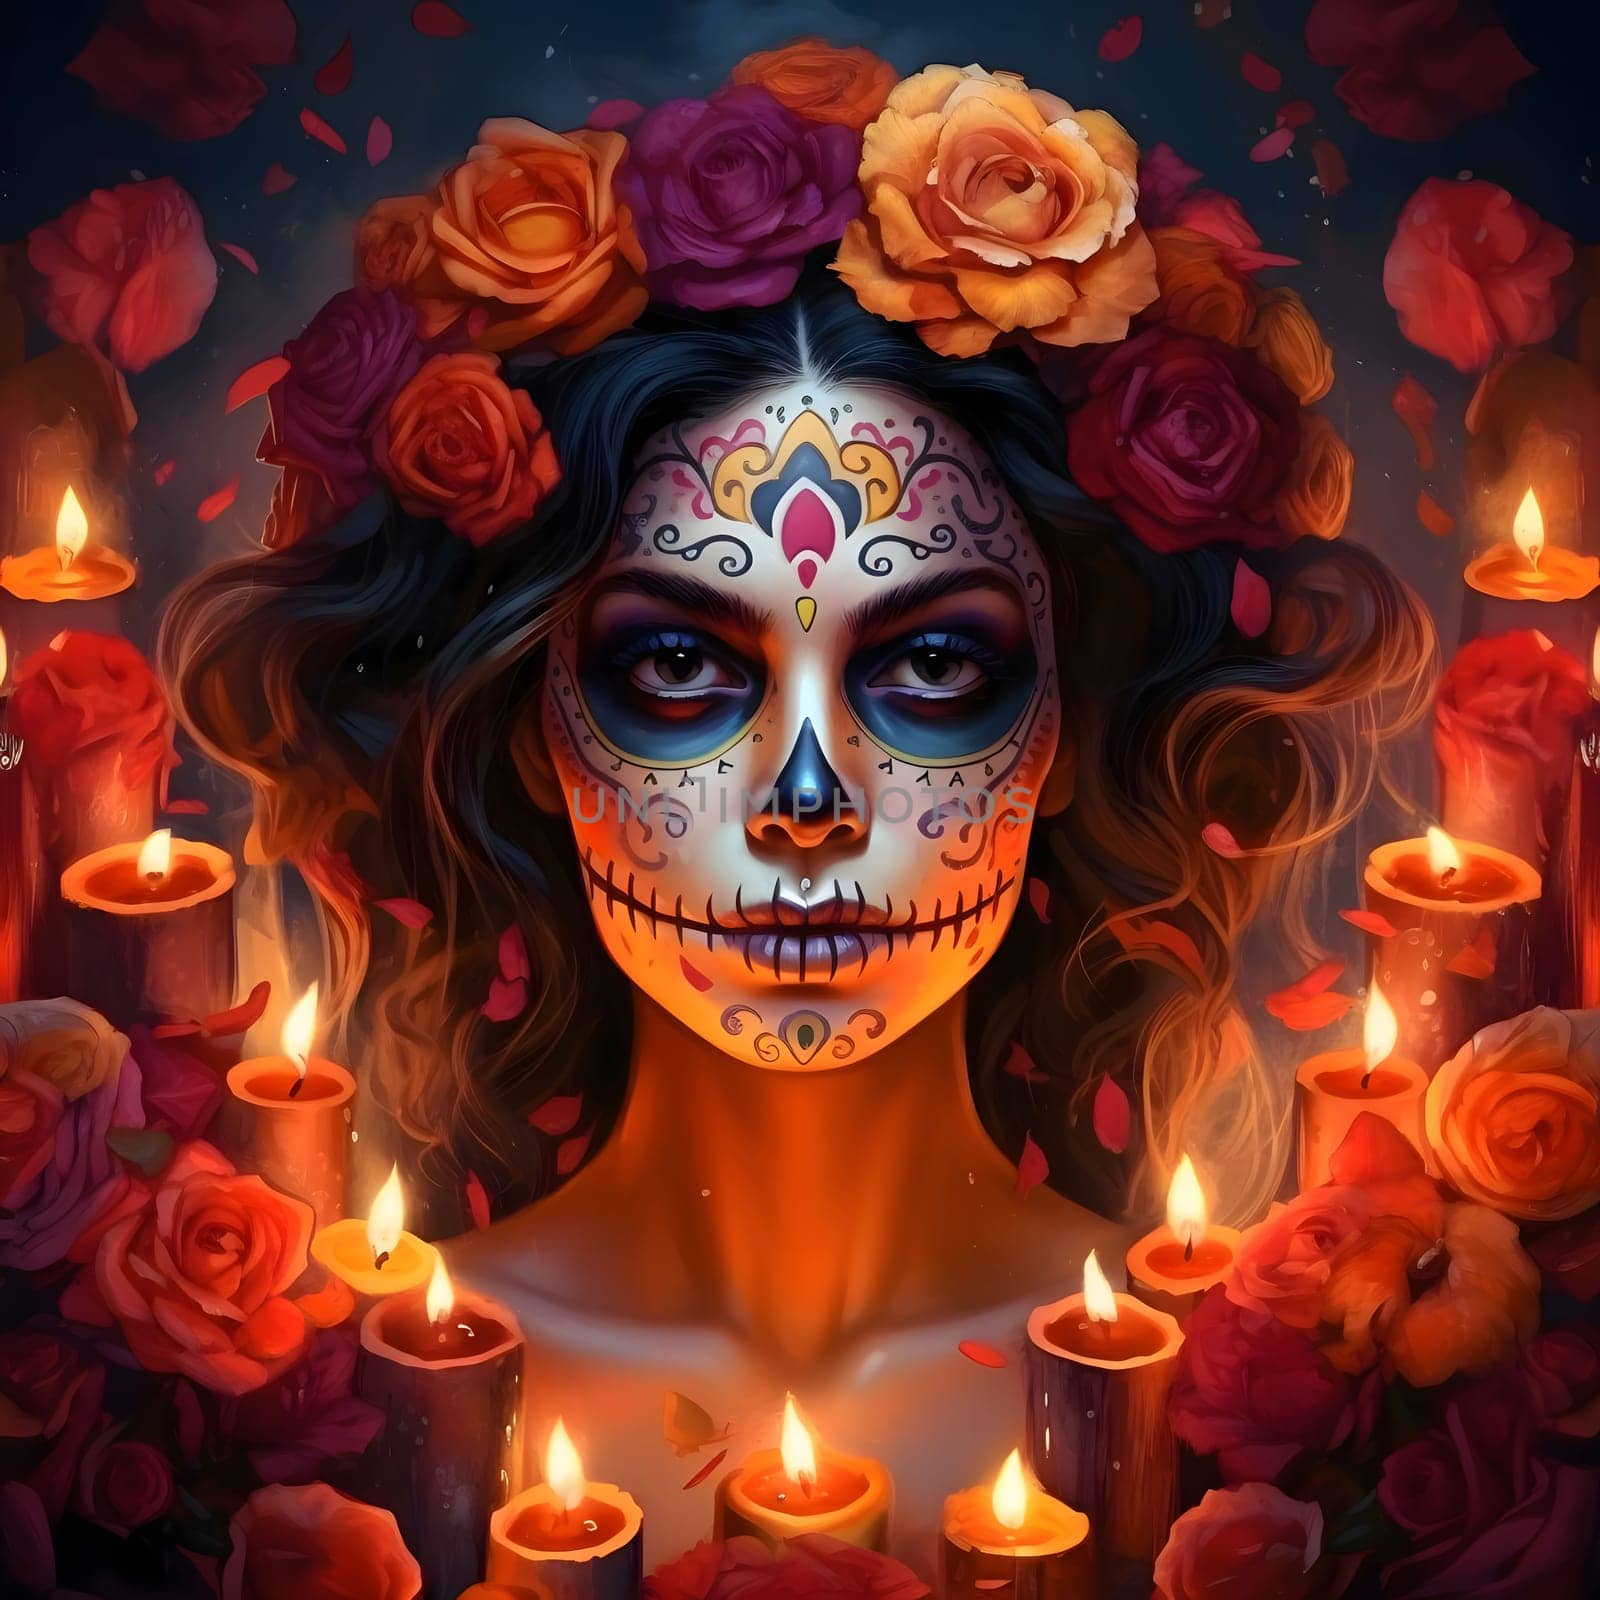 Dark painted face of a woman with sewn lips, head decorated with colorful roses, candles all around For the day of the dead and Halloween. Atmosphere of death and solemnity.